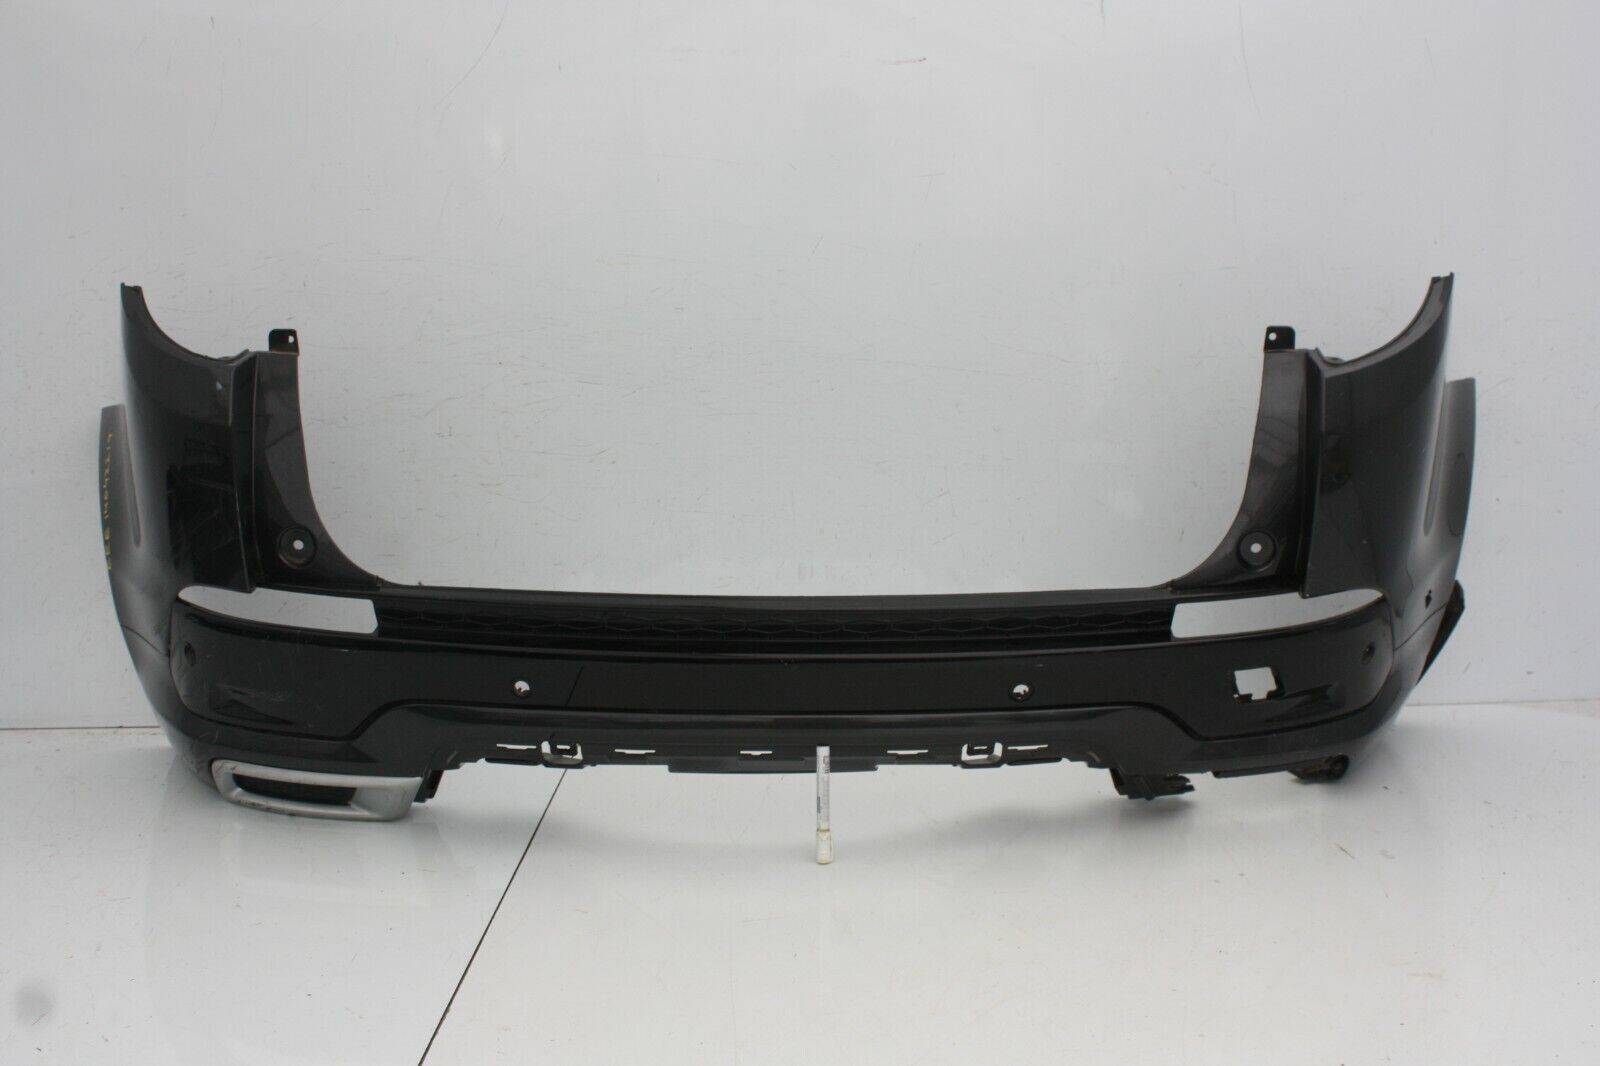 Land Rover Discovery Sport Dynamic Rear Bumper 2015 TO 2019 Genuine 175900221193